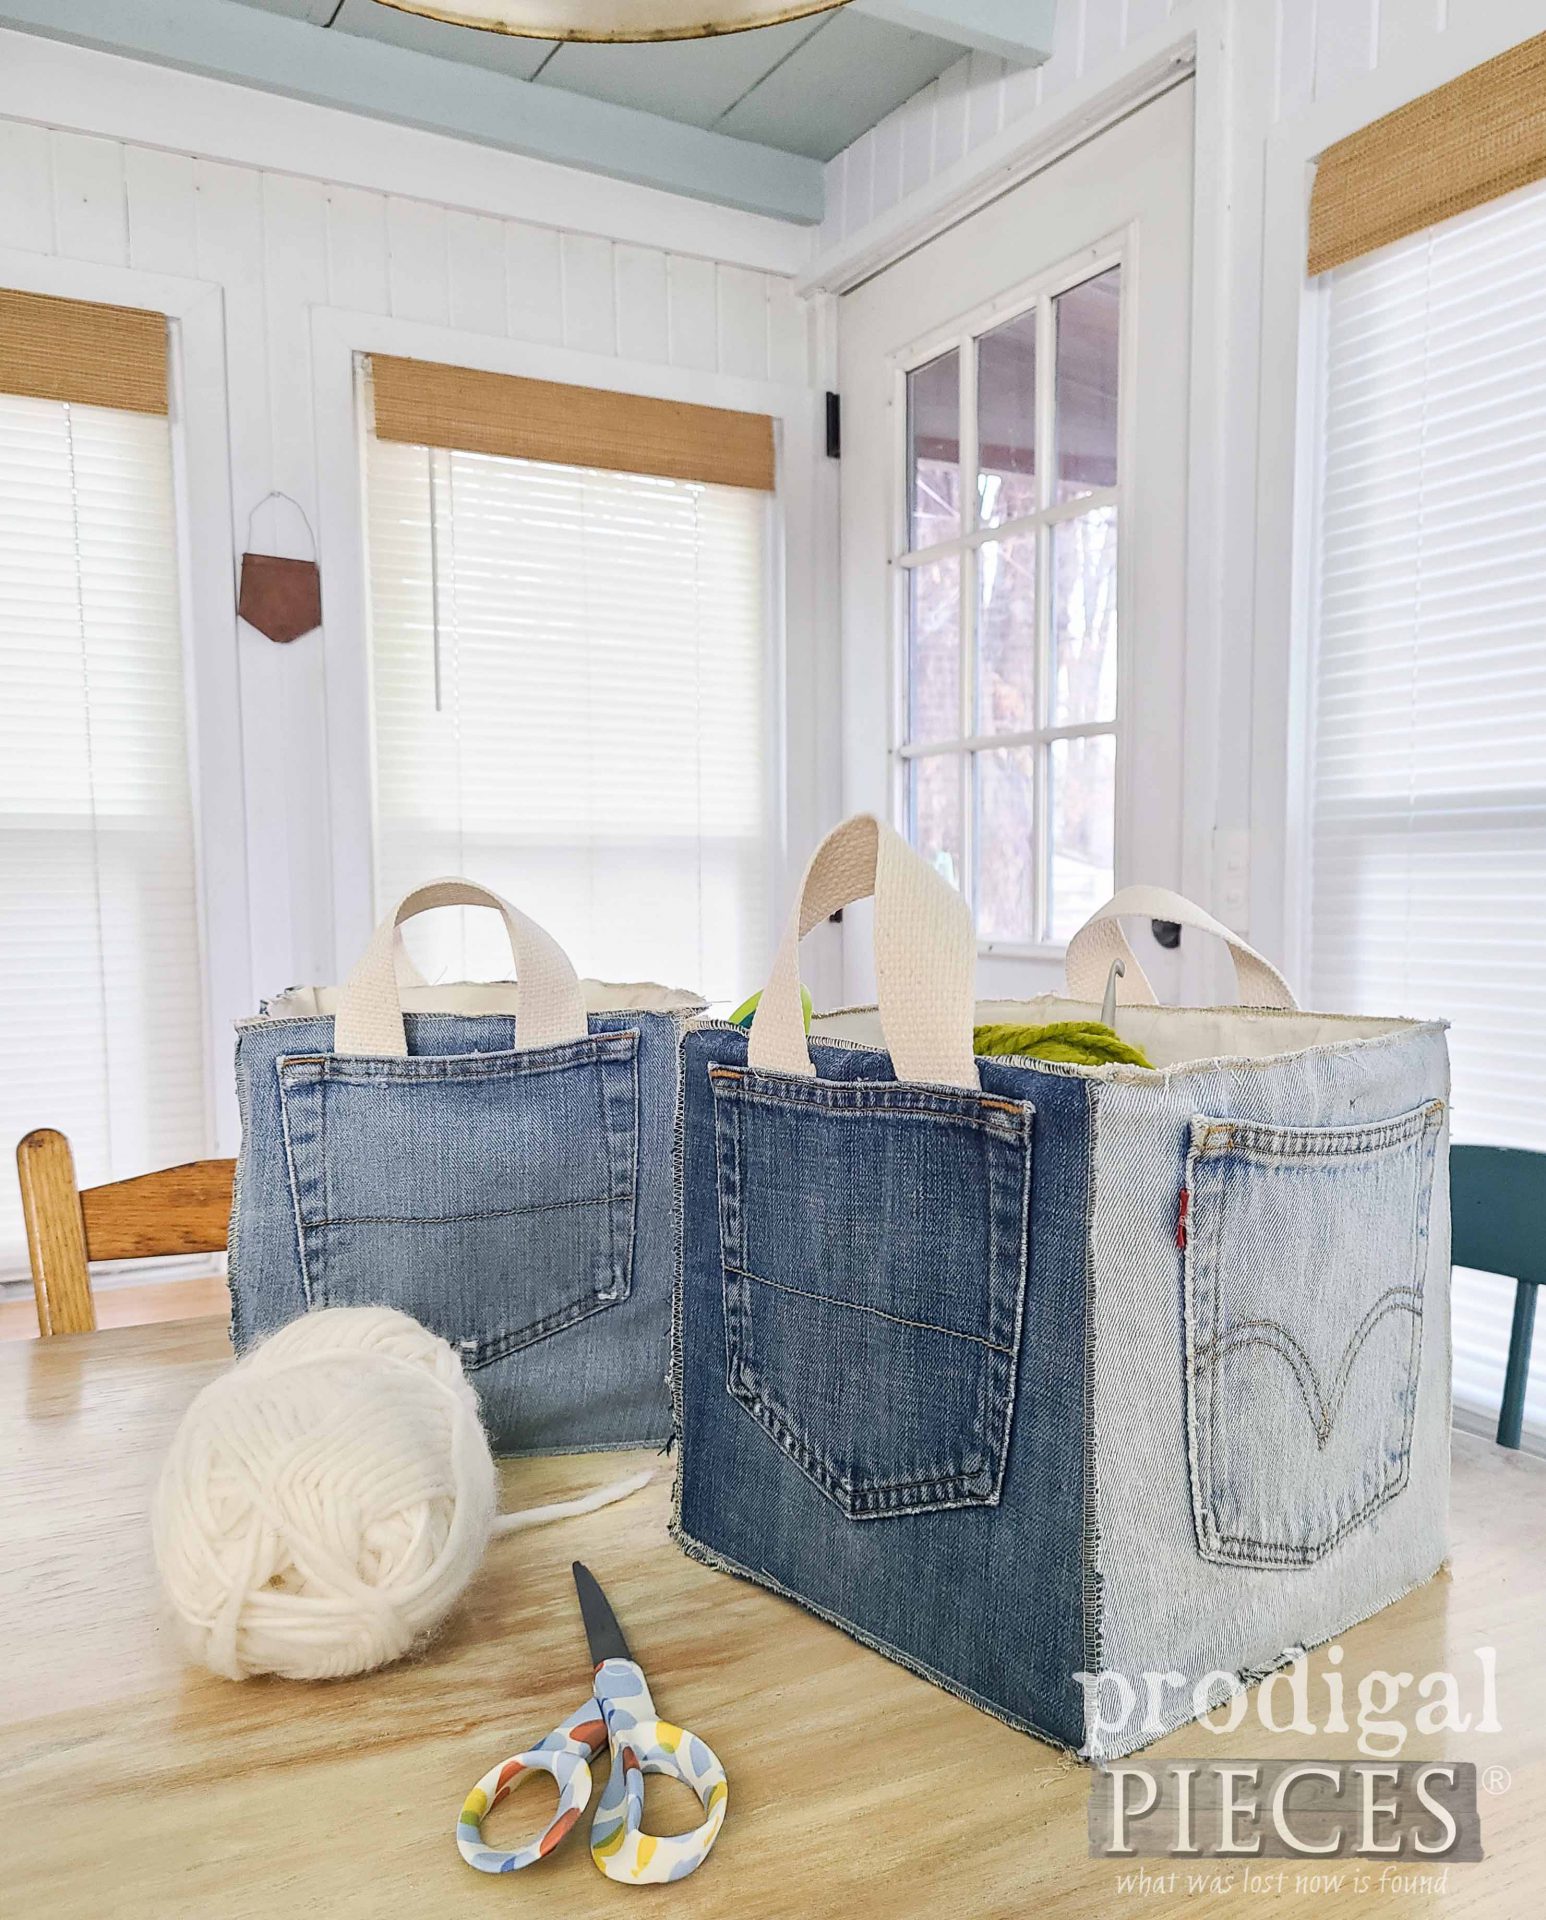 DIY Refashioned Blue Jean Bucket for Storage by Larissa of Prodigal Pieces | prodigalpieces.com #prodigalpieces #handmade #refashion #upcycled #jeans